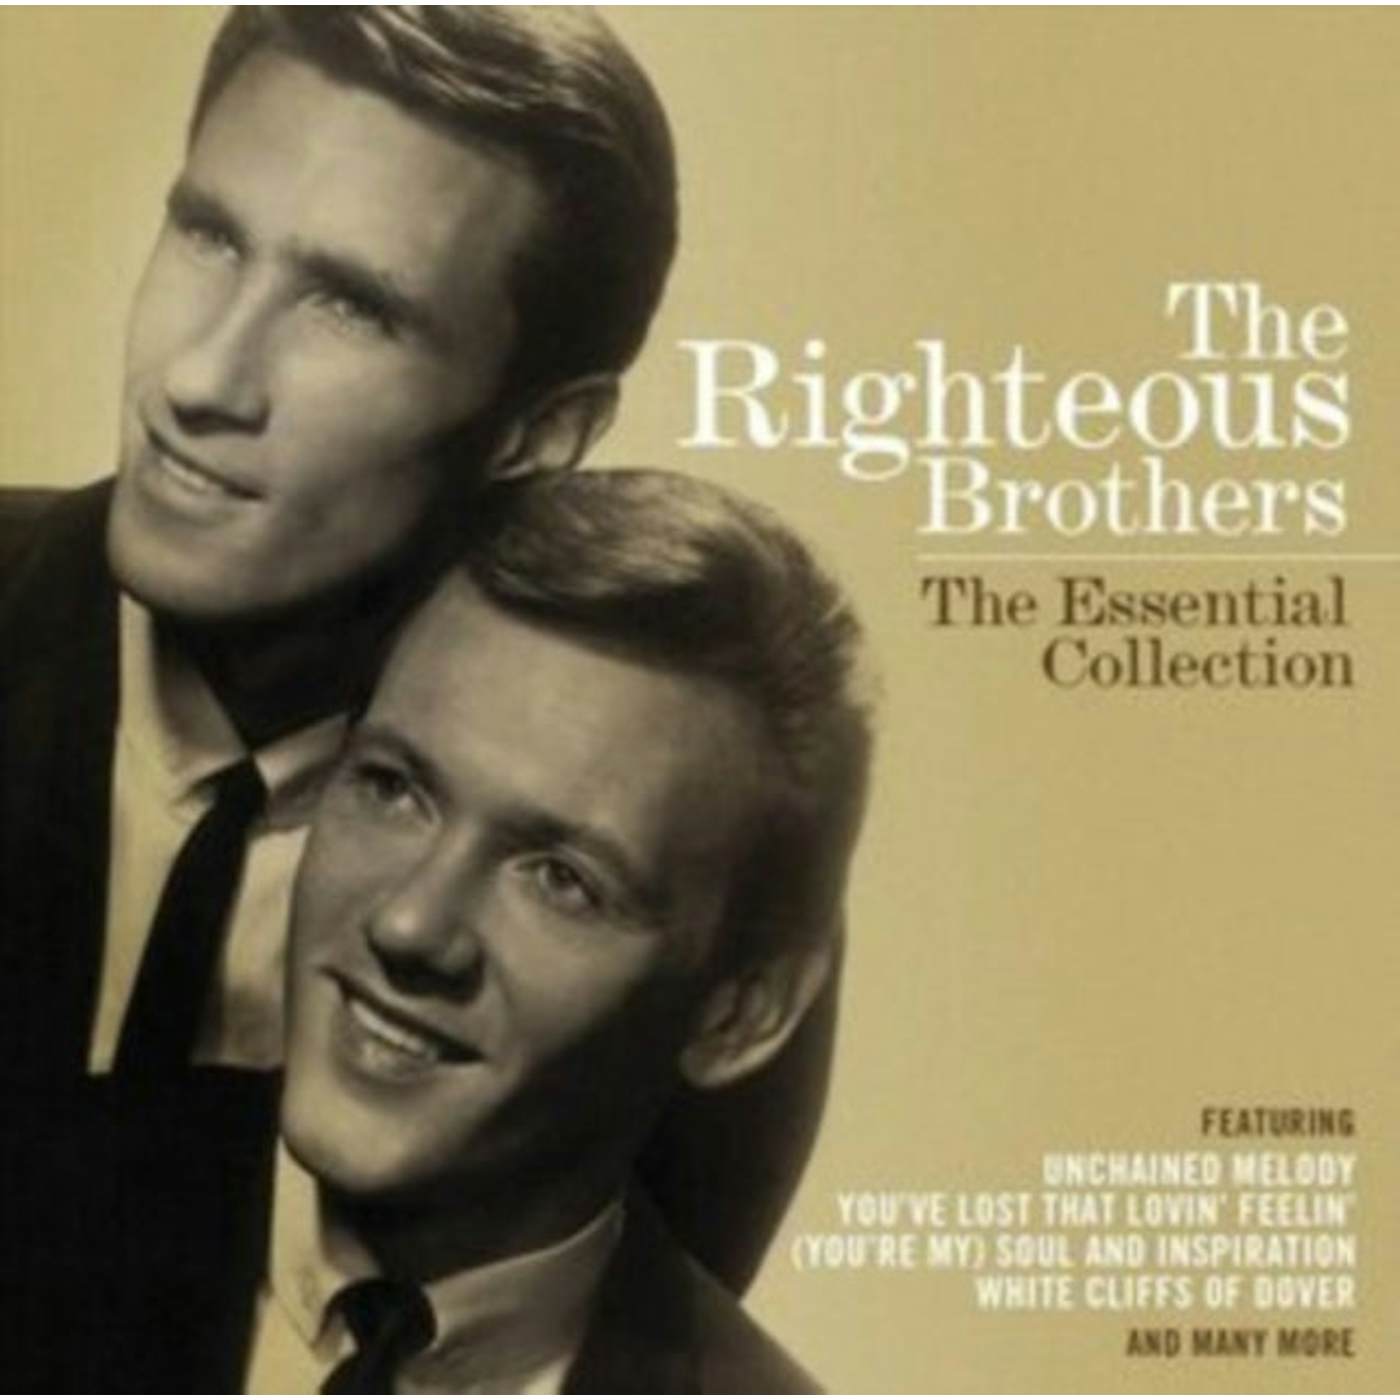 The Righteous Brothers CD - The Essential Collection